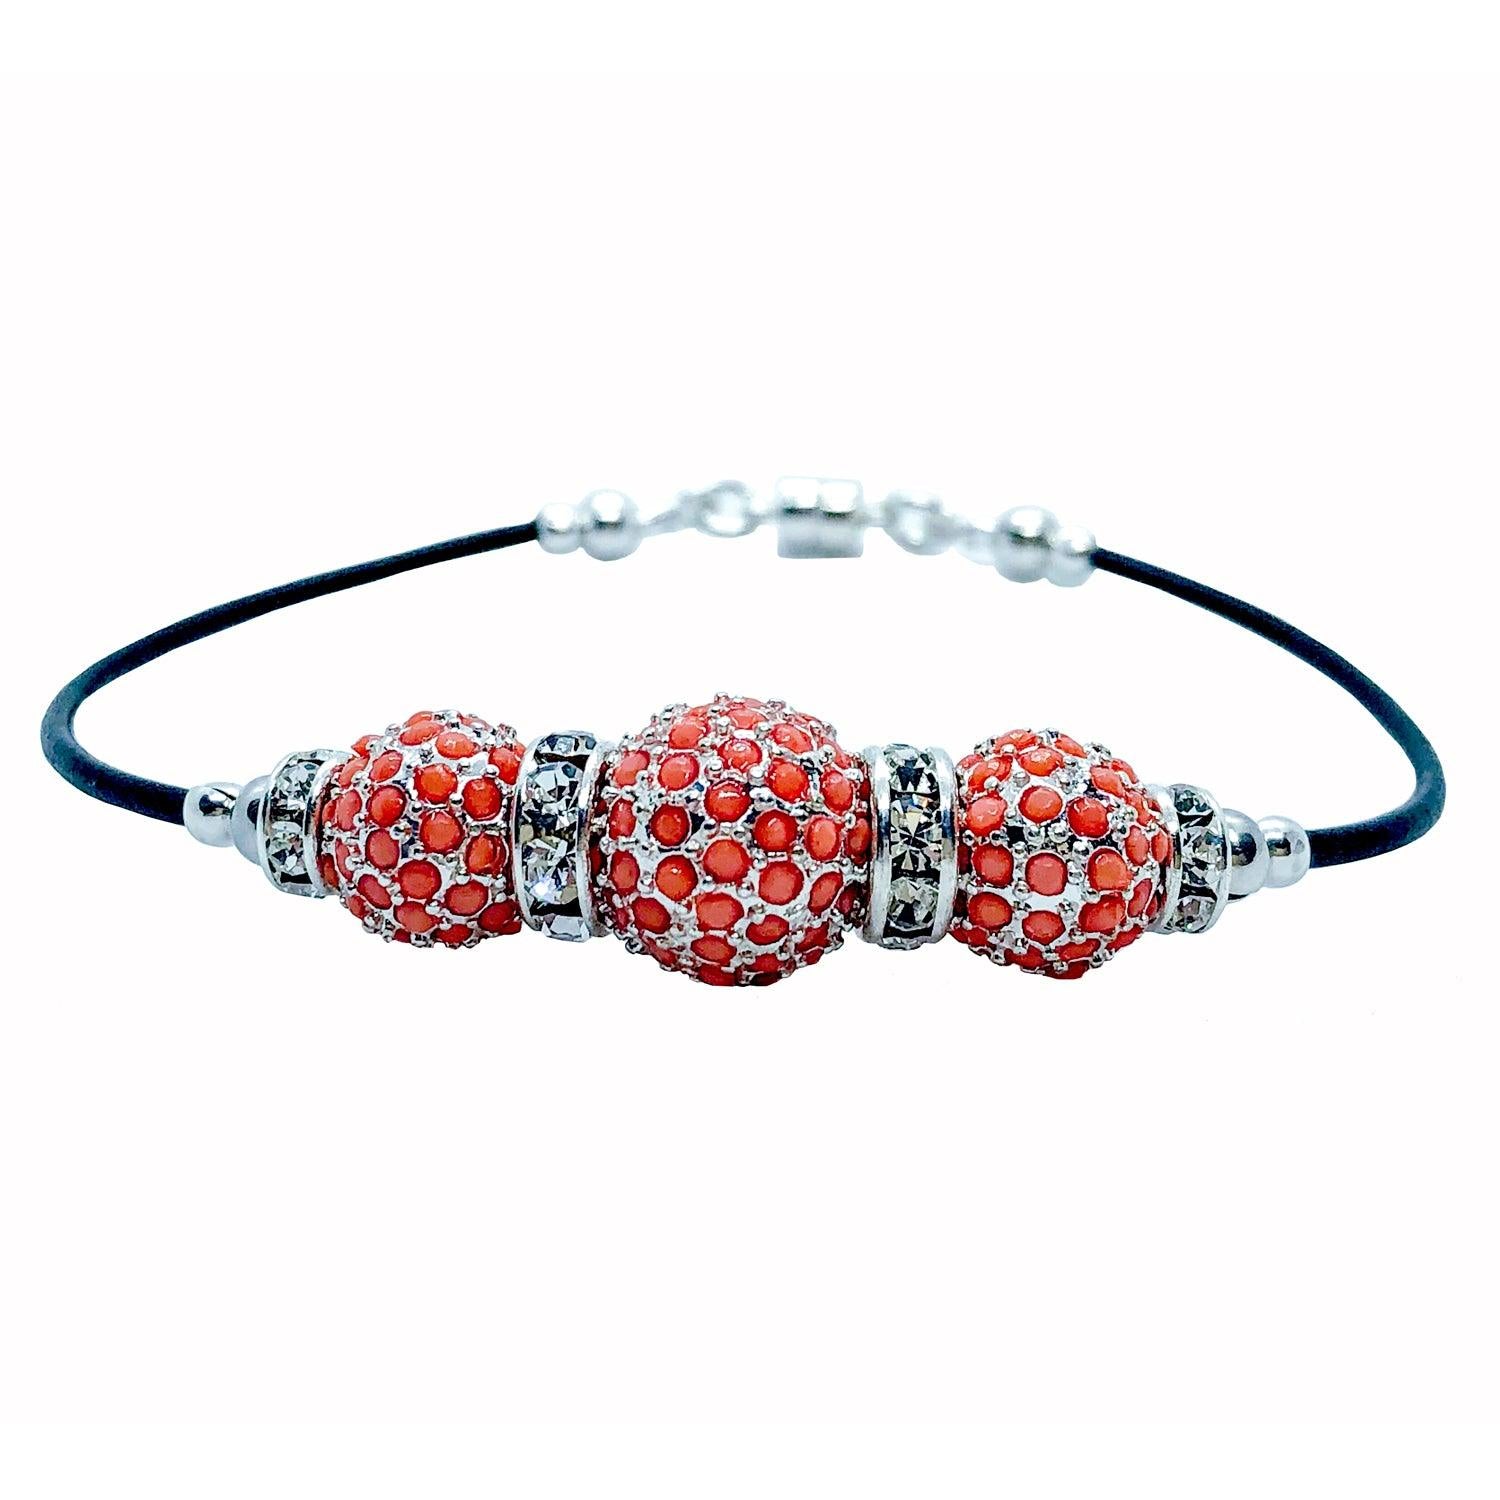 Crystal and Coral Bracelet Kit - Too Cute Beads